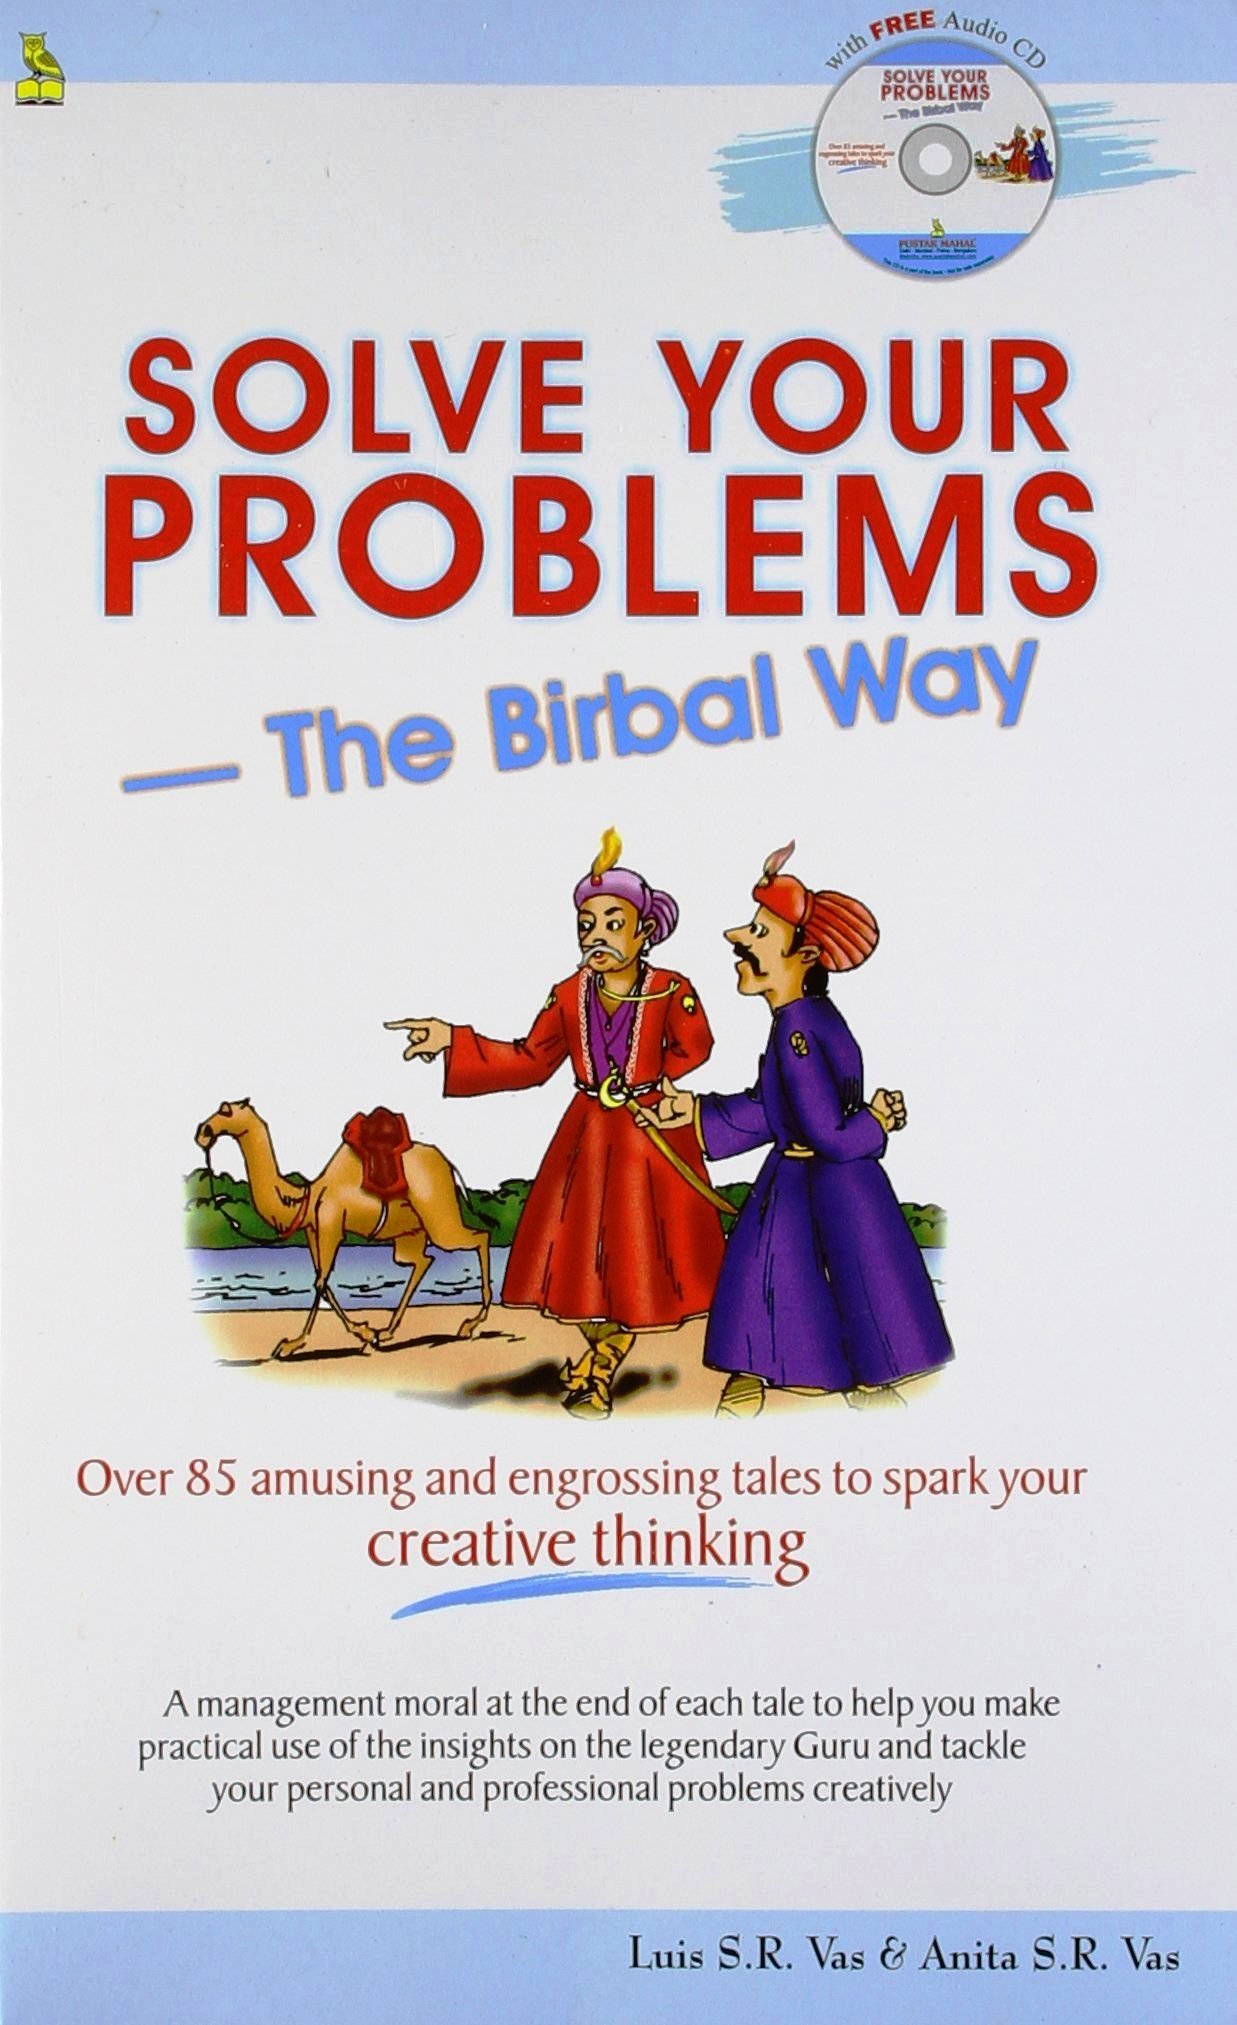 Solve Your Problems-The Birbal Way